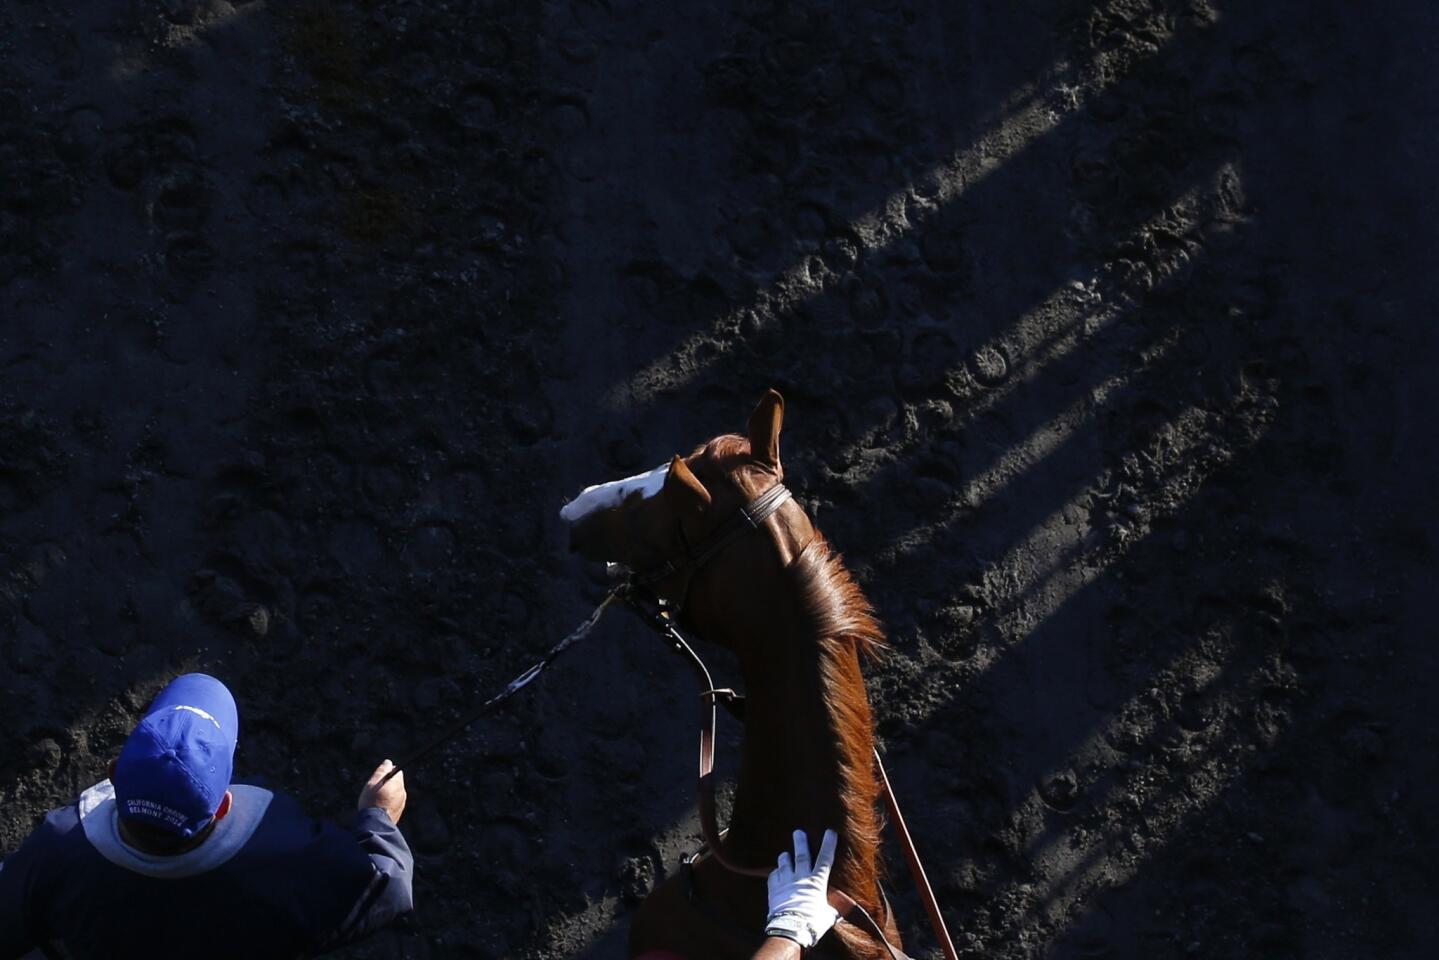 California Chrome, winner of the 2014 Kentucky Derby and Preakness Stakes, enters the track from a paddock area for morning workouts at Belmont Park.